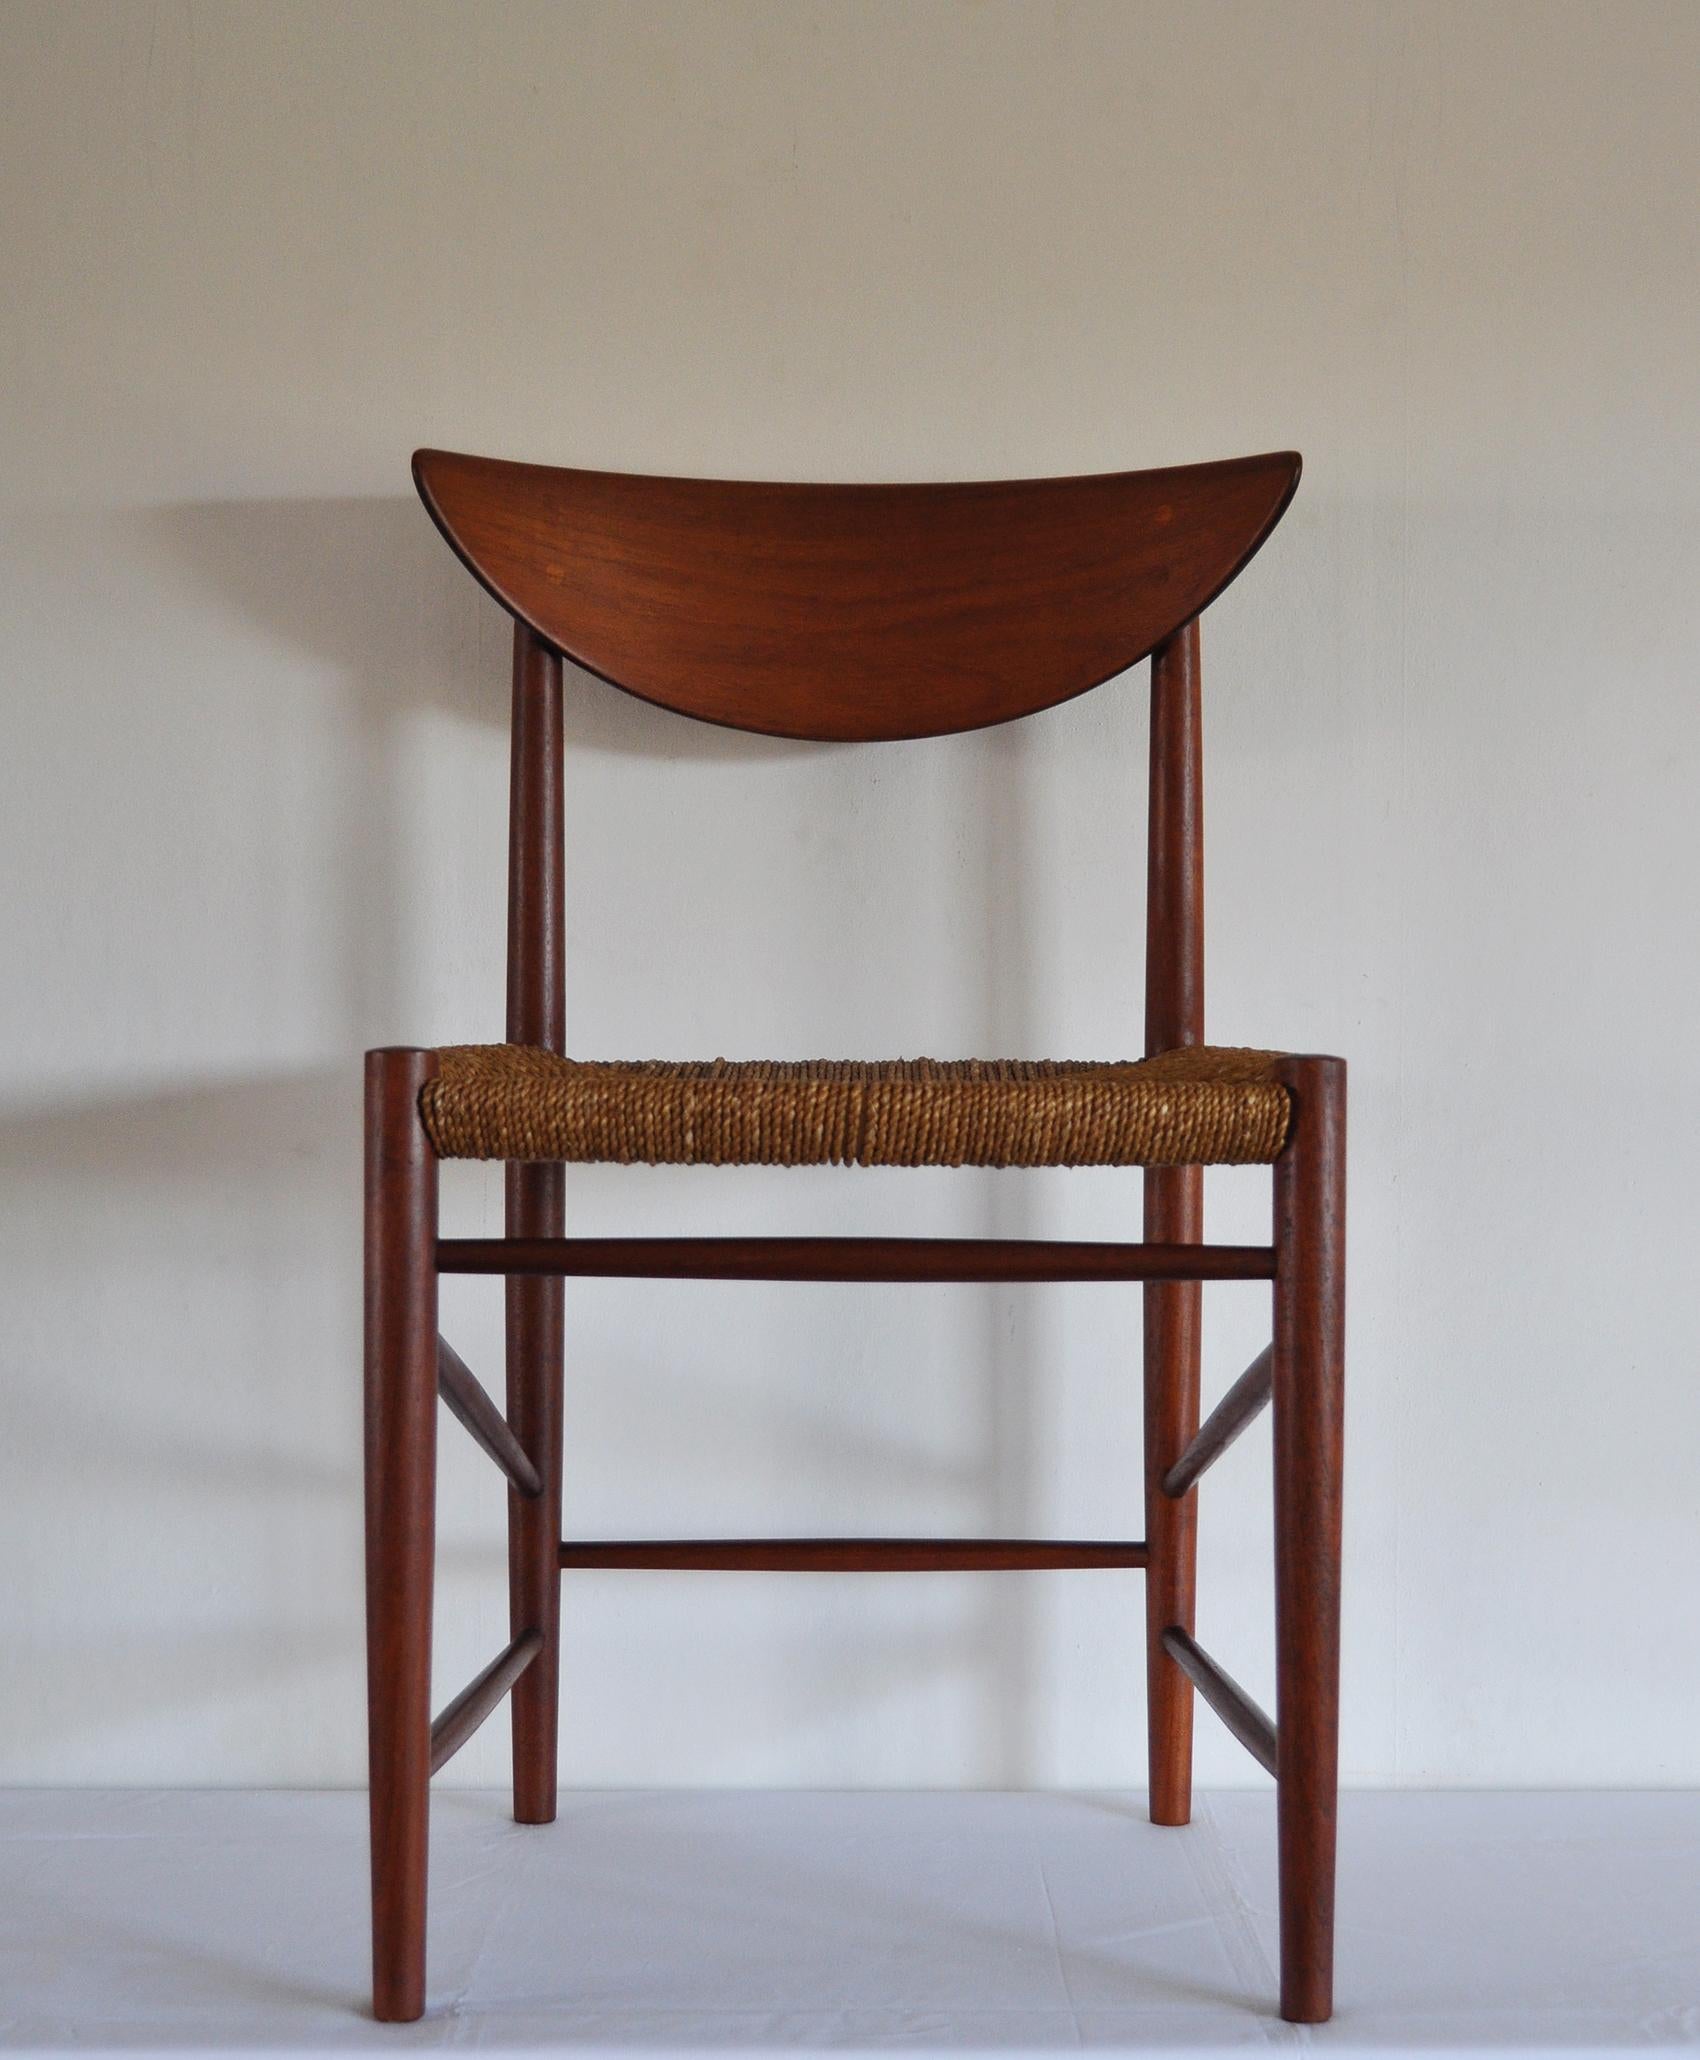 Dining chair model 316 designed by Peter Hvidt & Orla Mølgaard-Nielsen made of solid teak wood with original cord seat. Manufactured by Søborg Møbelfabrik, 1956. 
Very good condition, with minor signs of usage.

Dimensions:
Width 48 cm
Depth 46